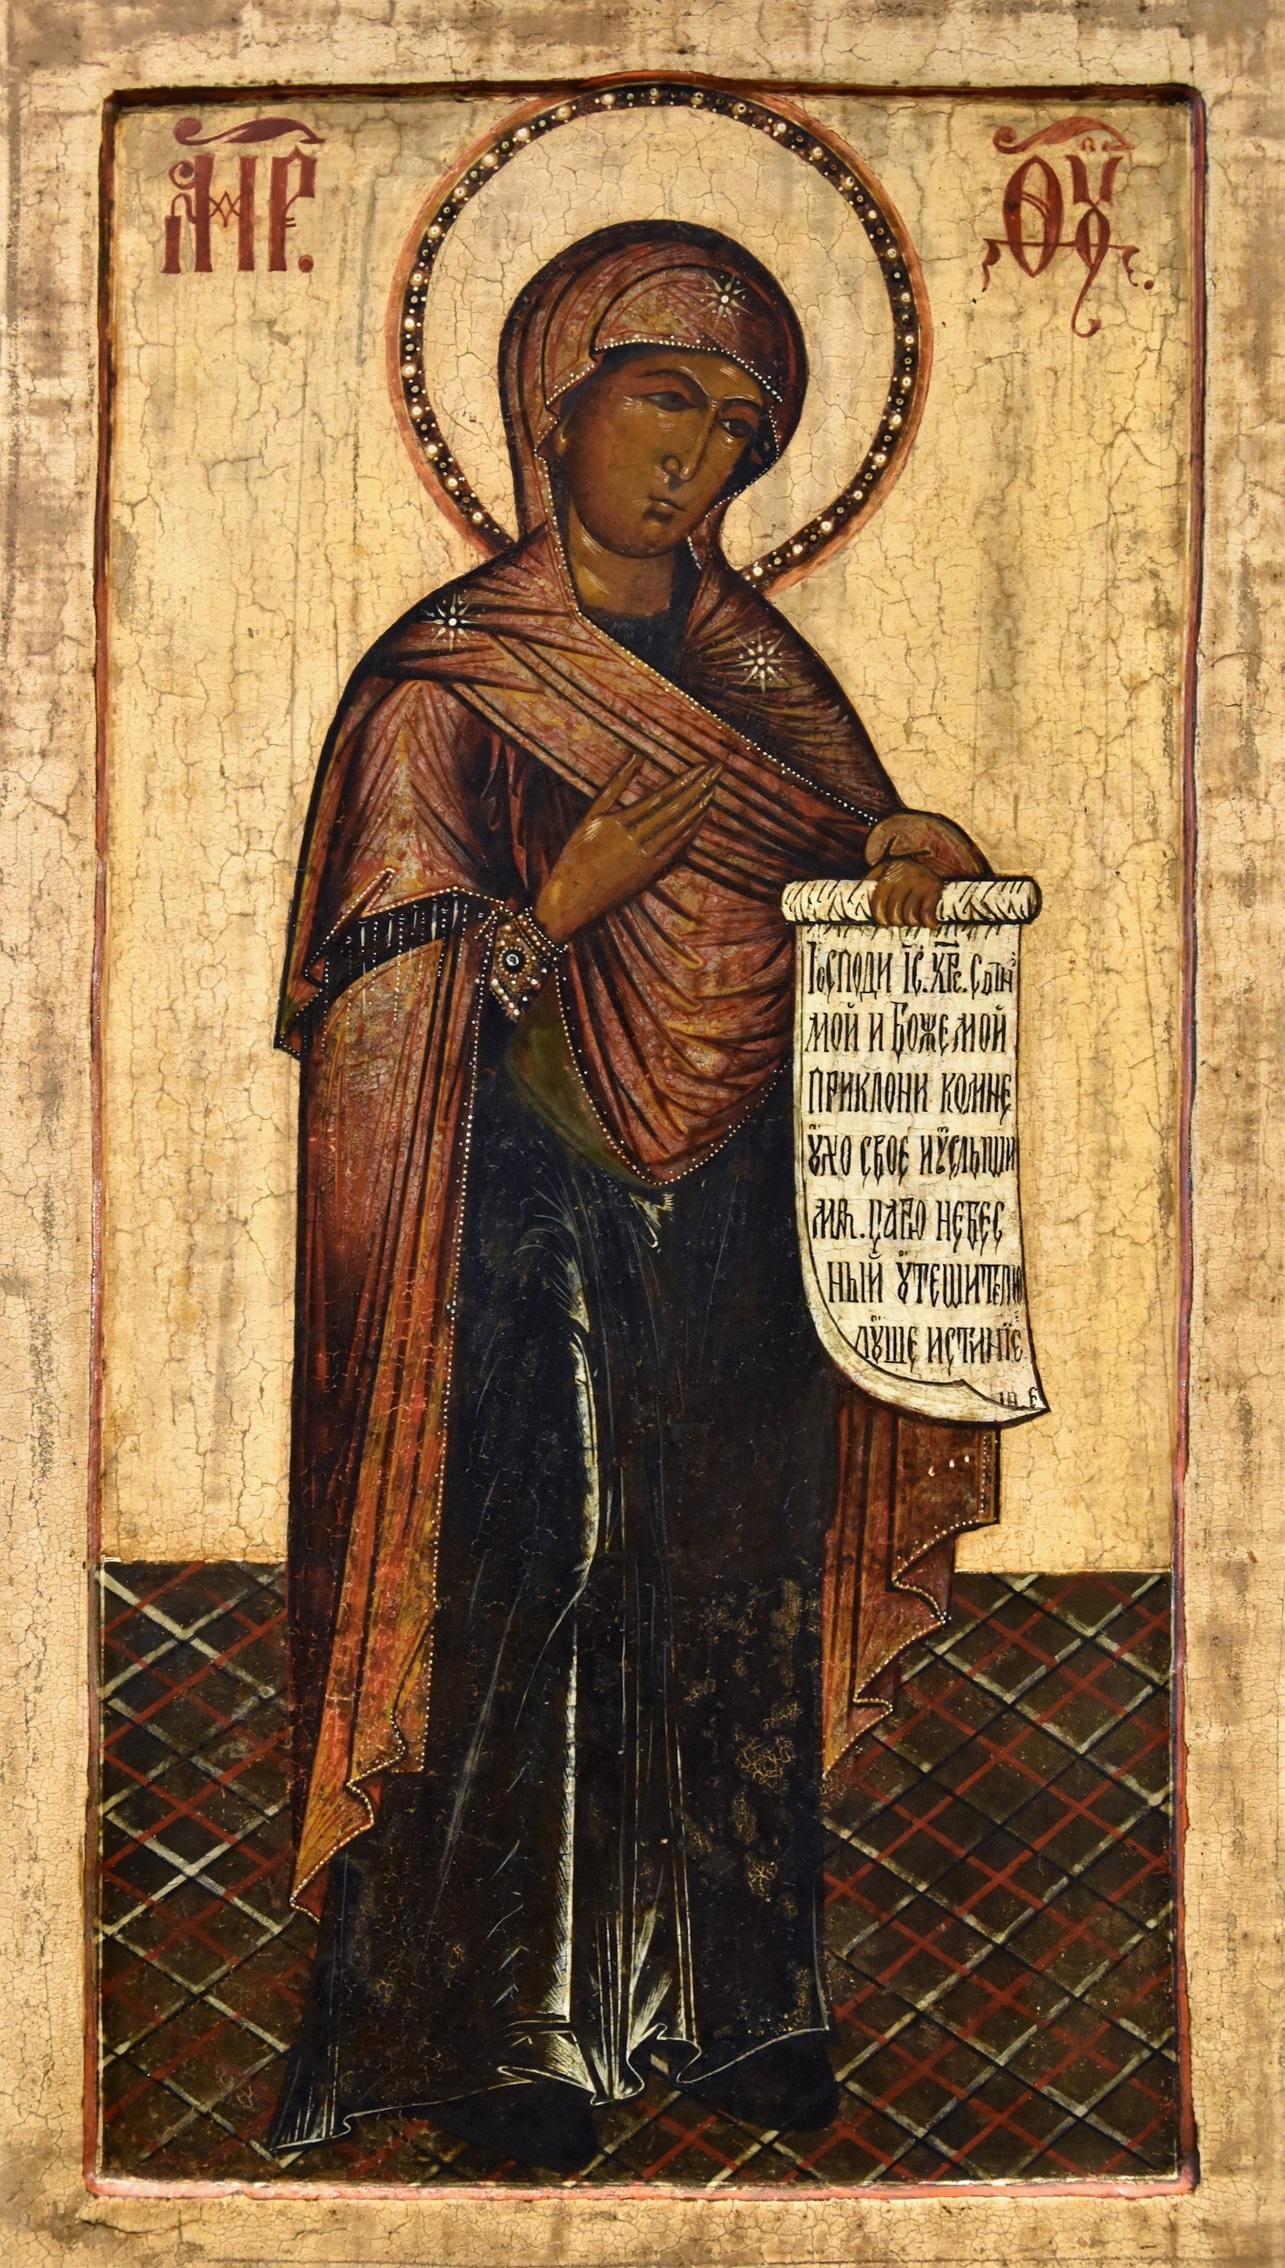 Antique Russian icon ''Mother of God of Deesis''
Central Russia - 19th century

71 x 40 cm.

Egg tempera on wooden panel

Antique Russian icon with the Mother of God, portrayed full-length and turned three-quarters to the right, with one hand raised